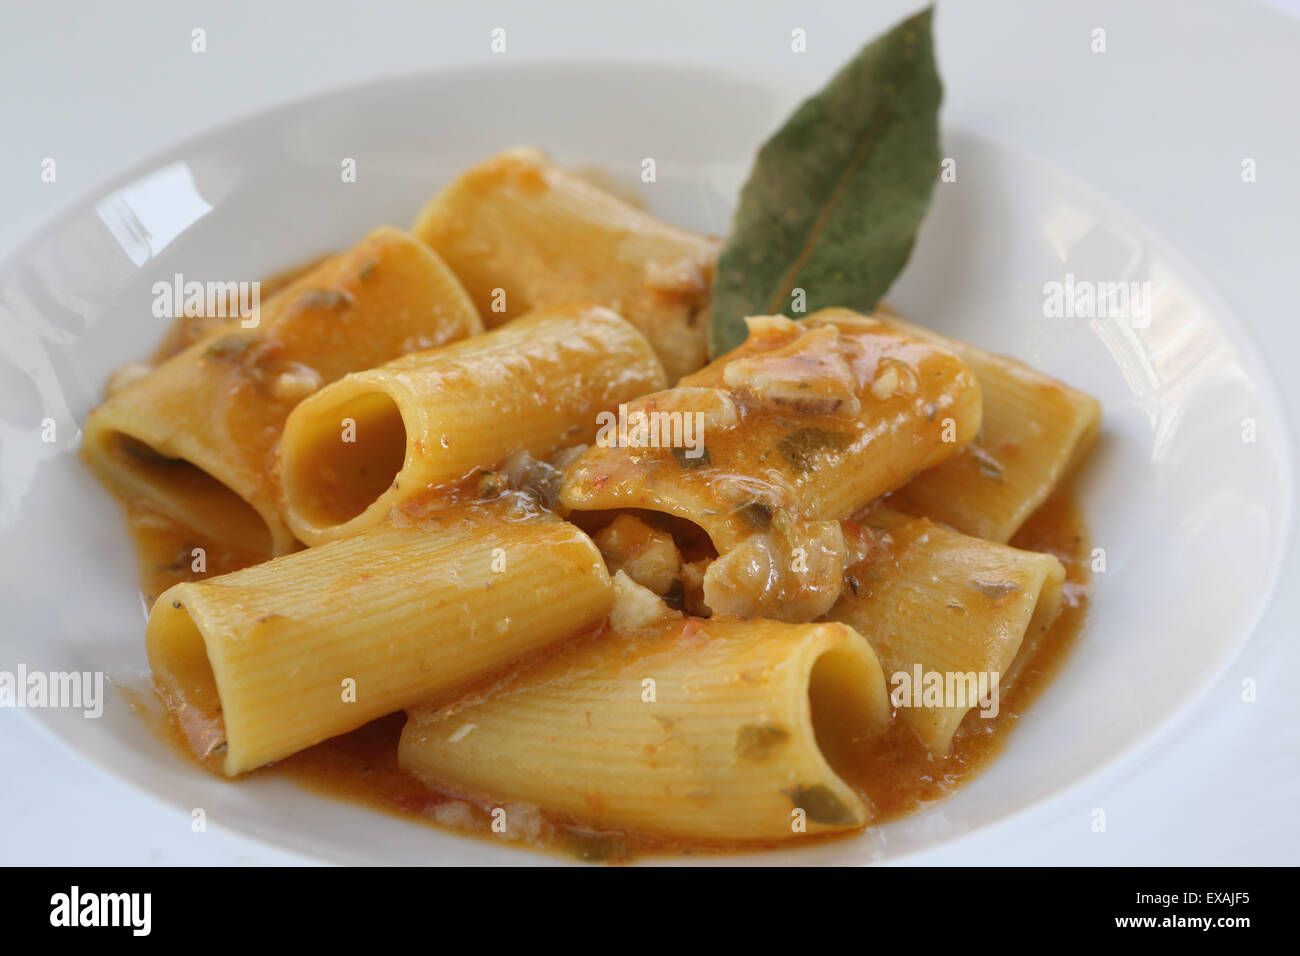 Tubes of southern Italian paccheri pasta served with a tomato sauce and pieces of scorpion fish in Monopoli, Apulia, Italy Stock Photo